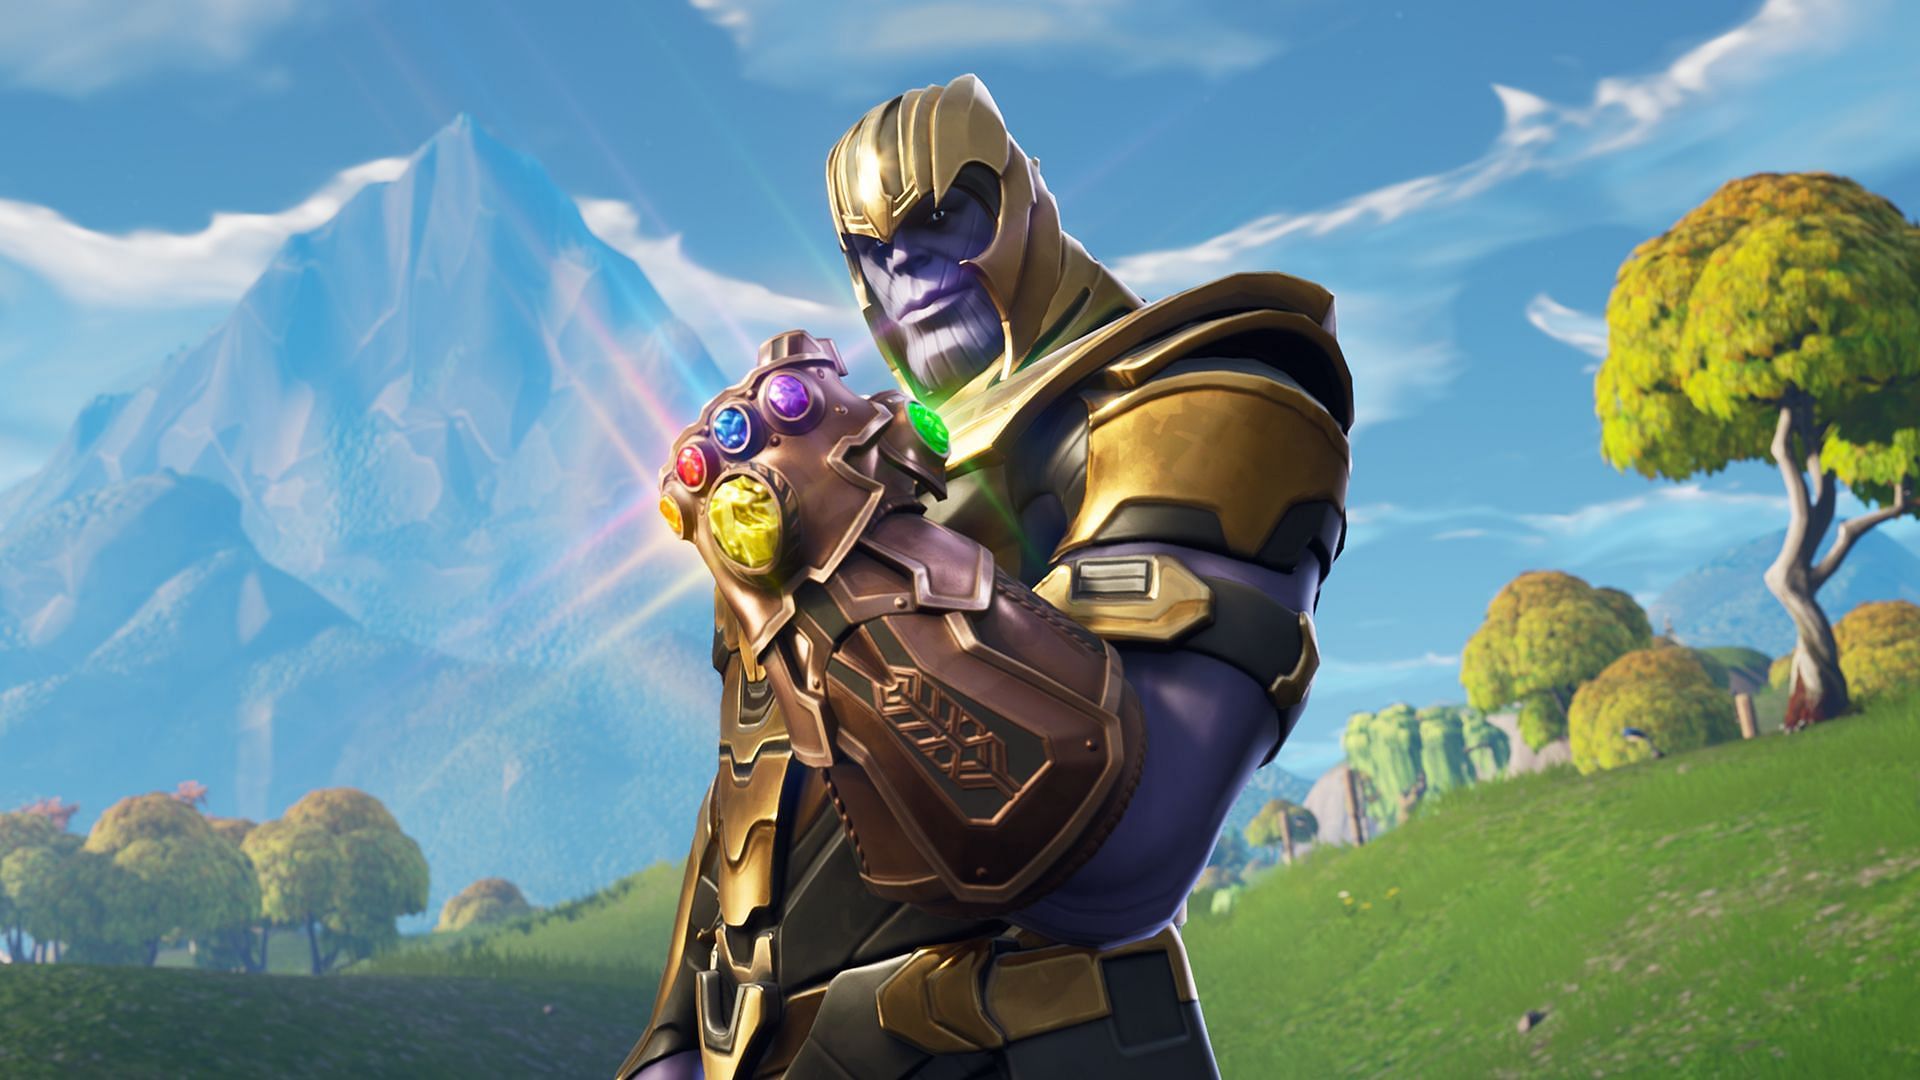 Thanos might be the worthy contender against the Cube Queen in Fortnite Chapter 2 Season 8 (Image via Epic Games)